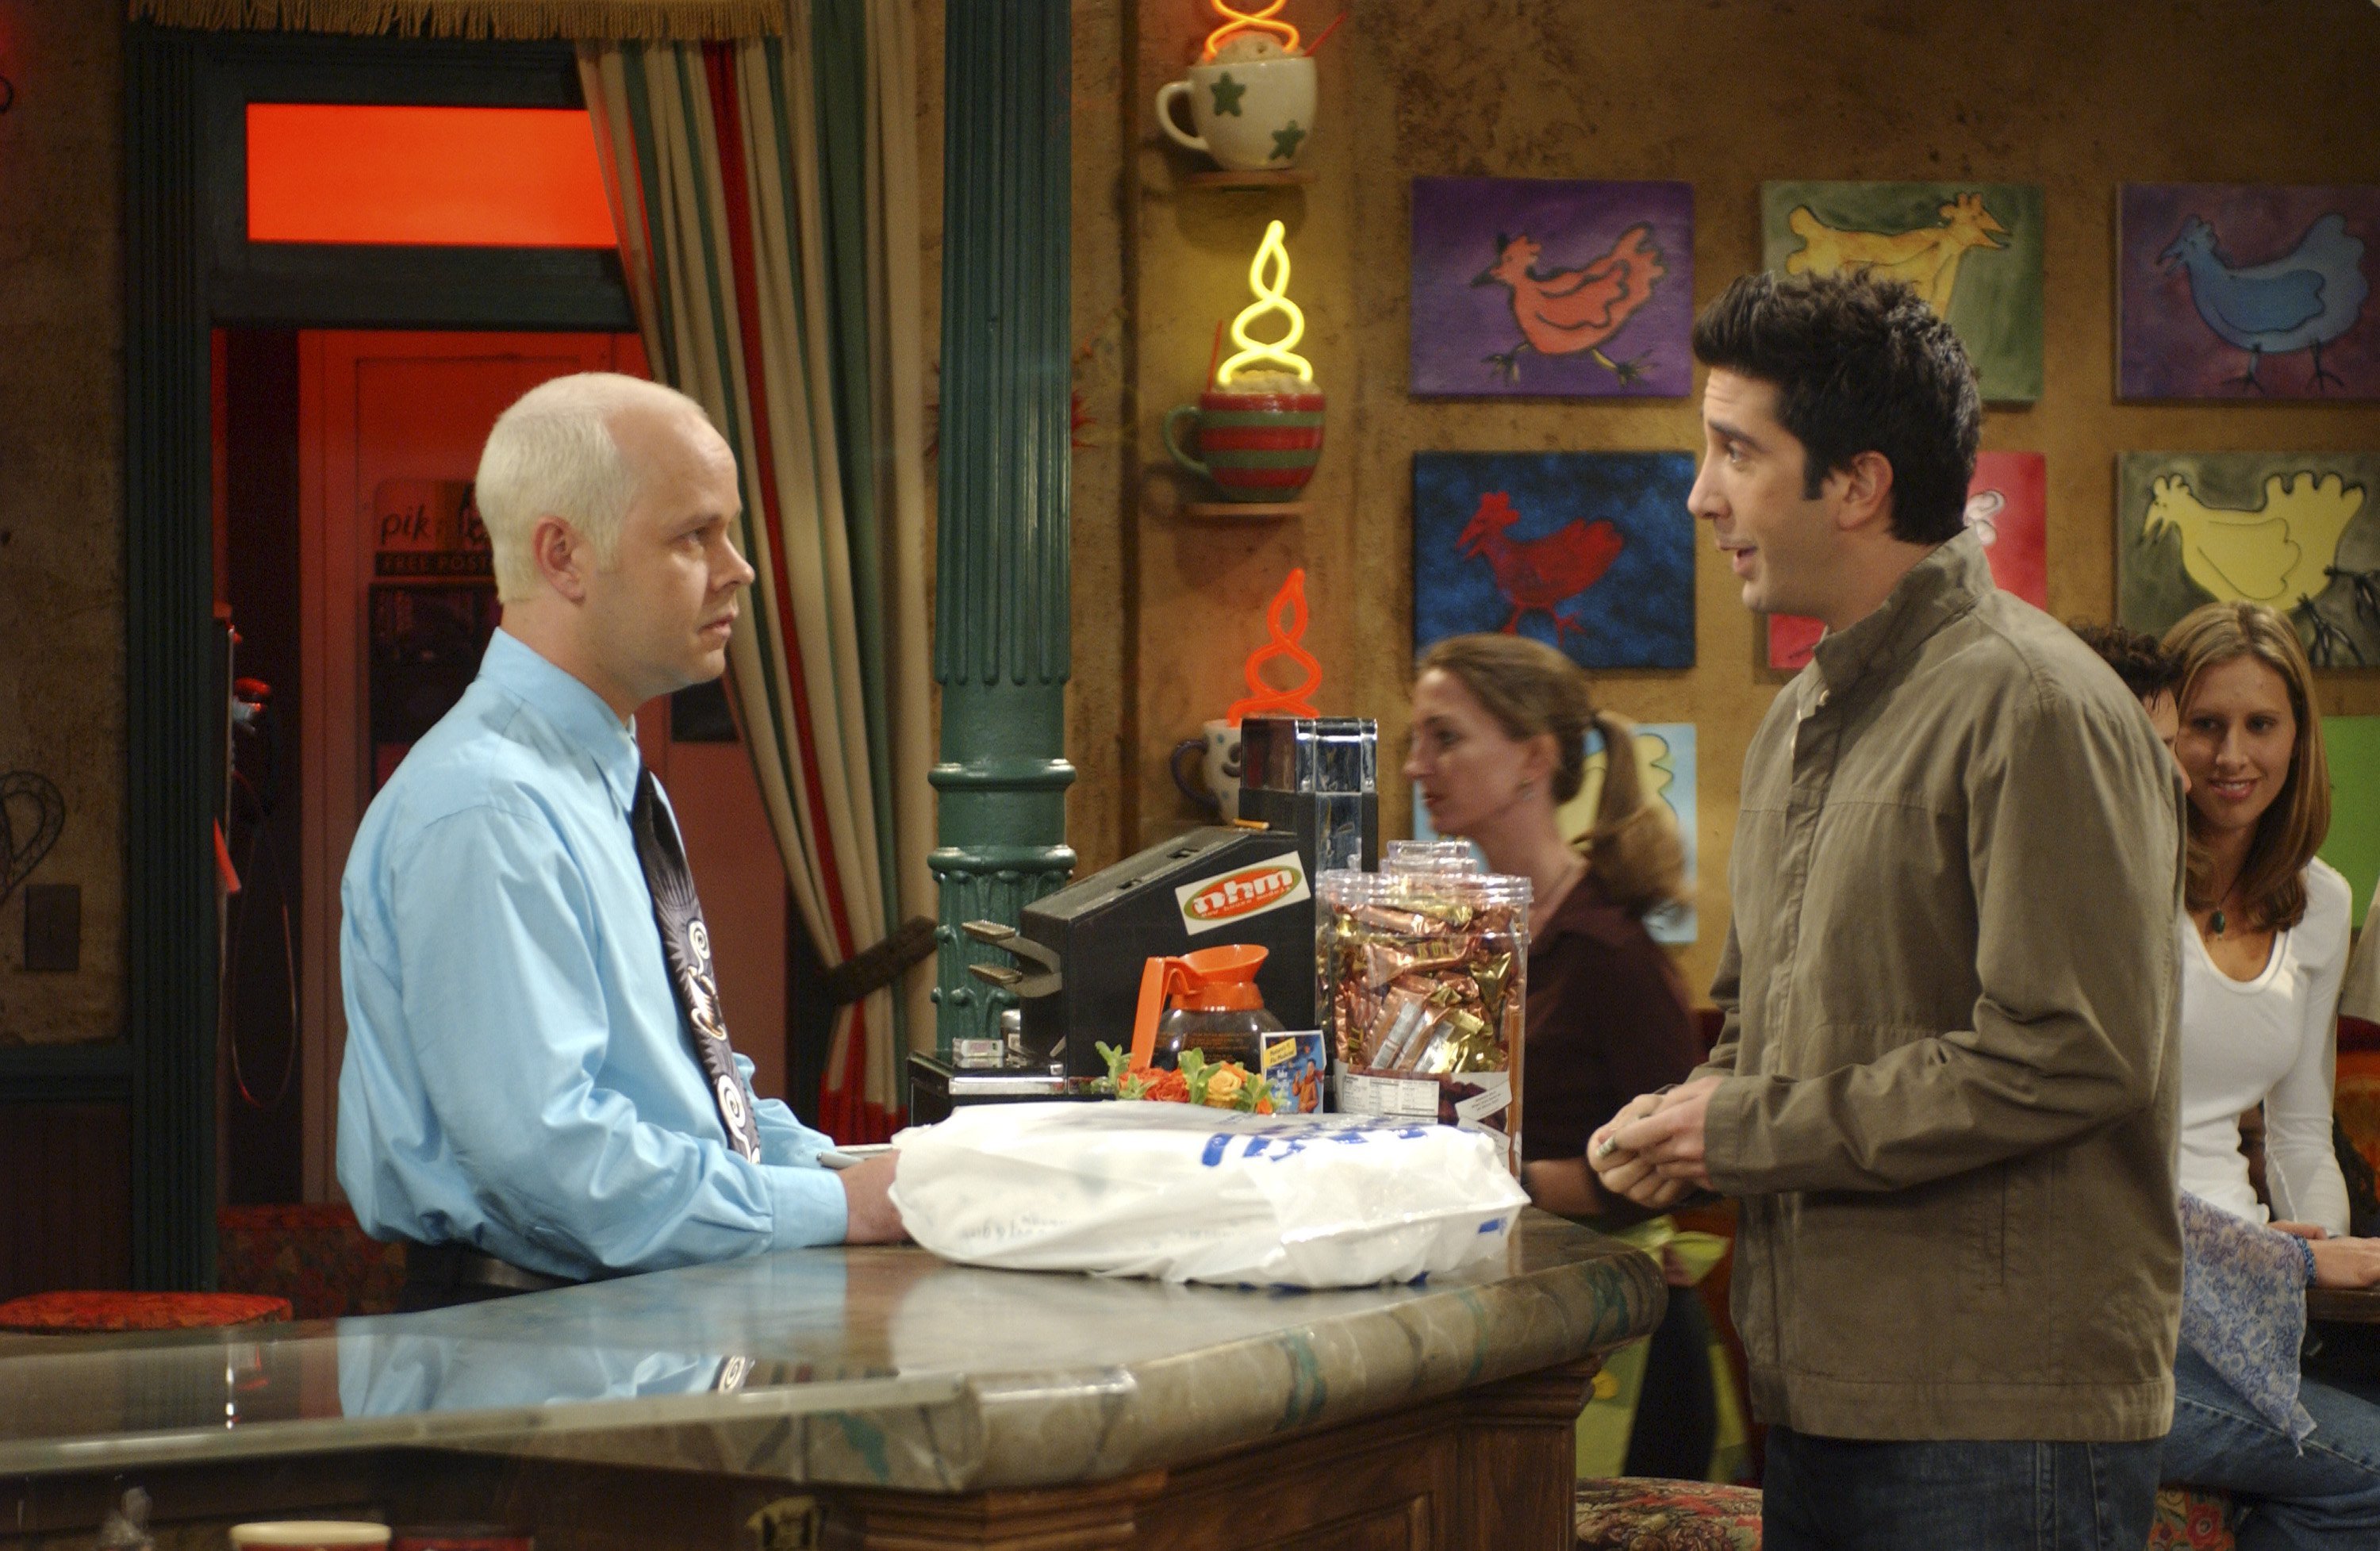 Ross (David Schwimmer) talks with Gunther (James Michael Tyler) at the coffee shop in Friends.